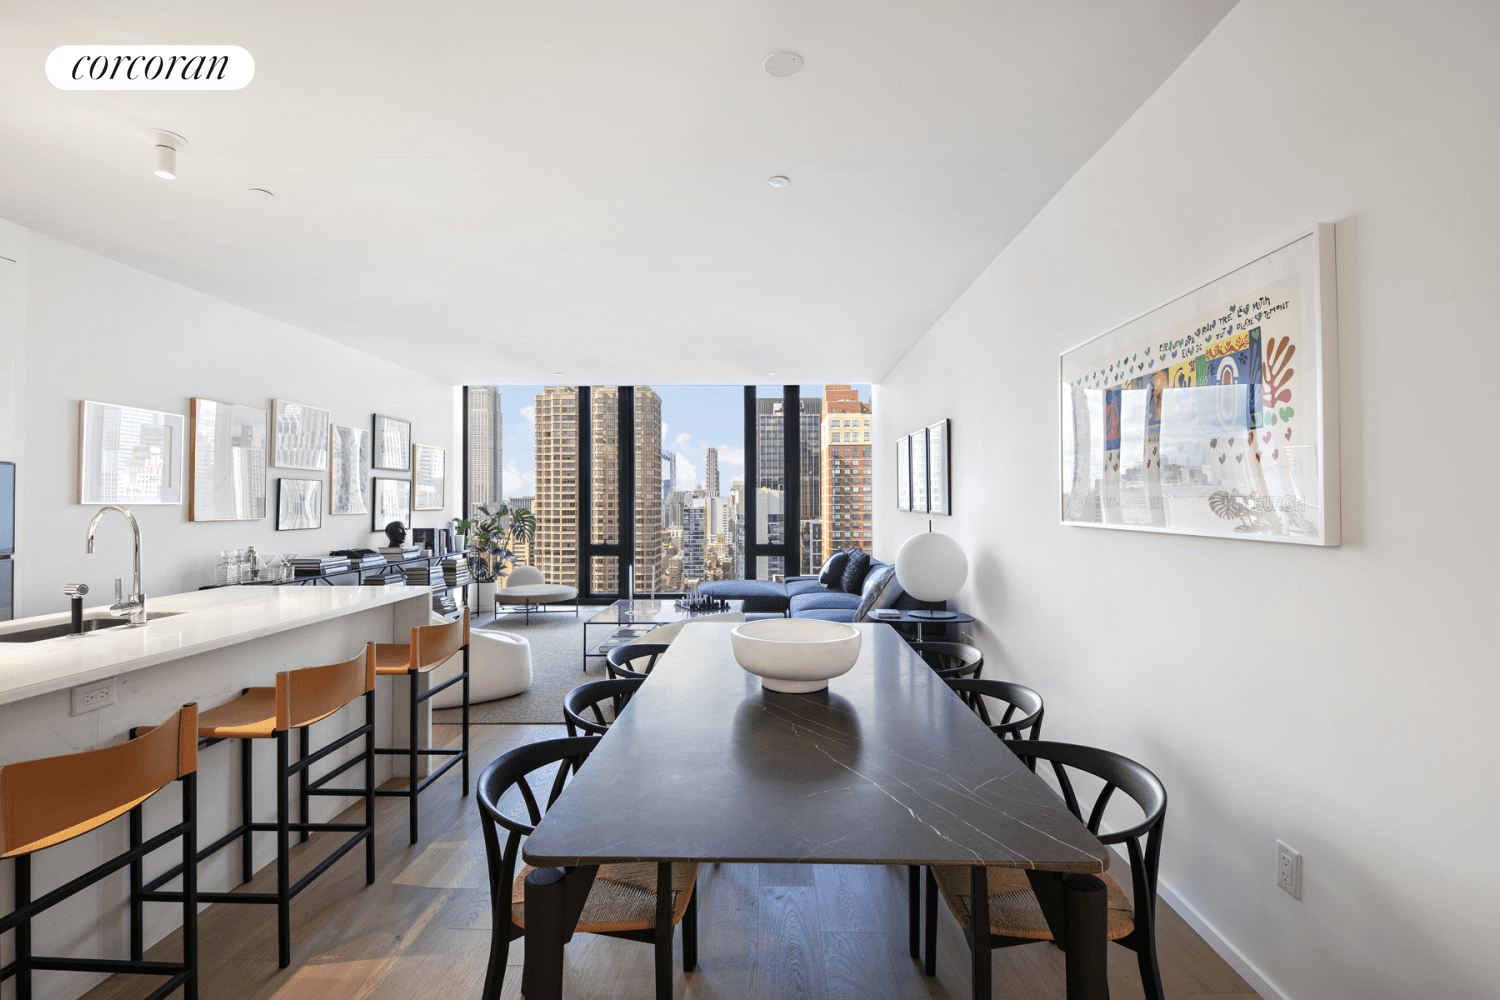 Residence 35F at One United Nations Park is a 1, 640sf two bedroom, two bathroom plus powder room, boasting Manhattan skyline views including the Empire State and Chrysler buildings.